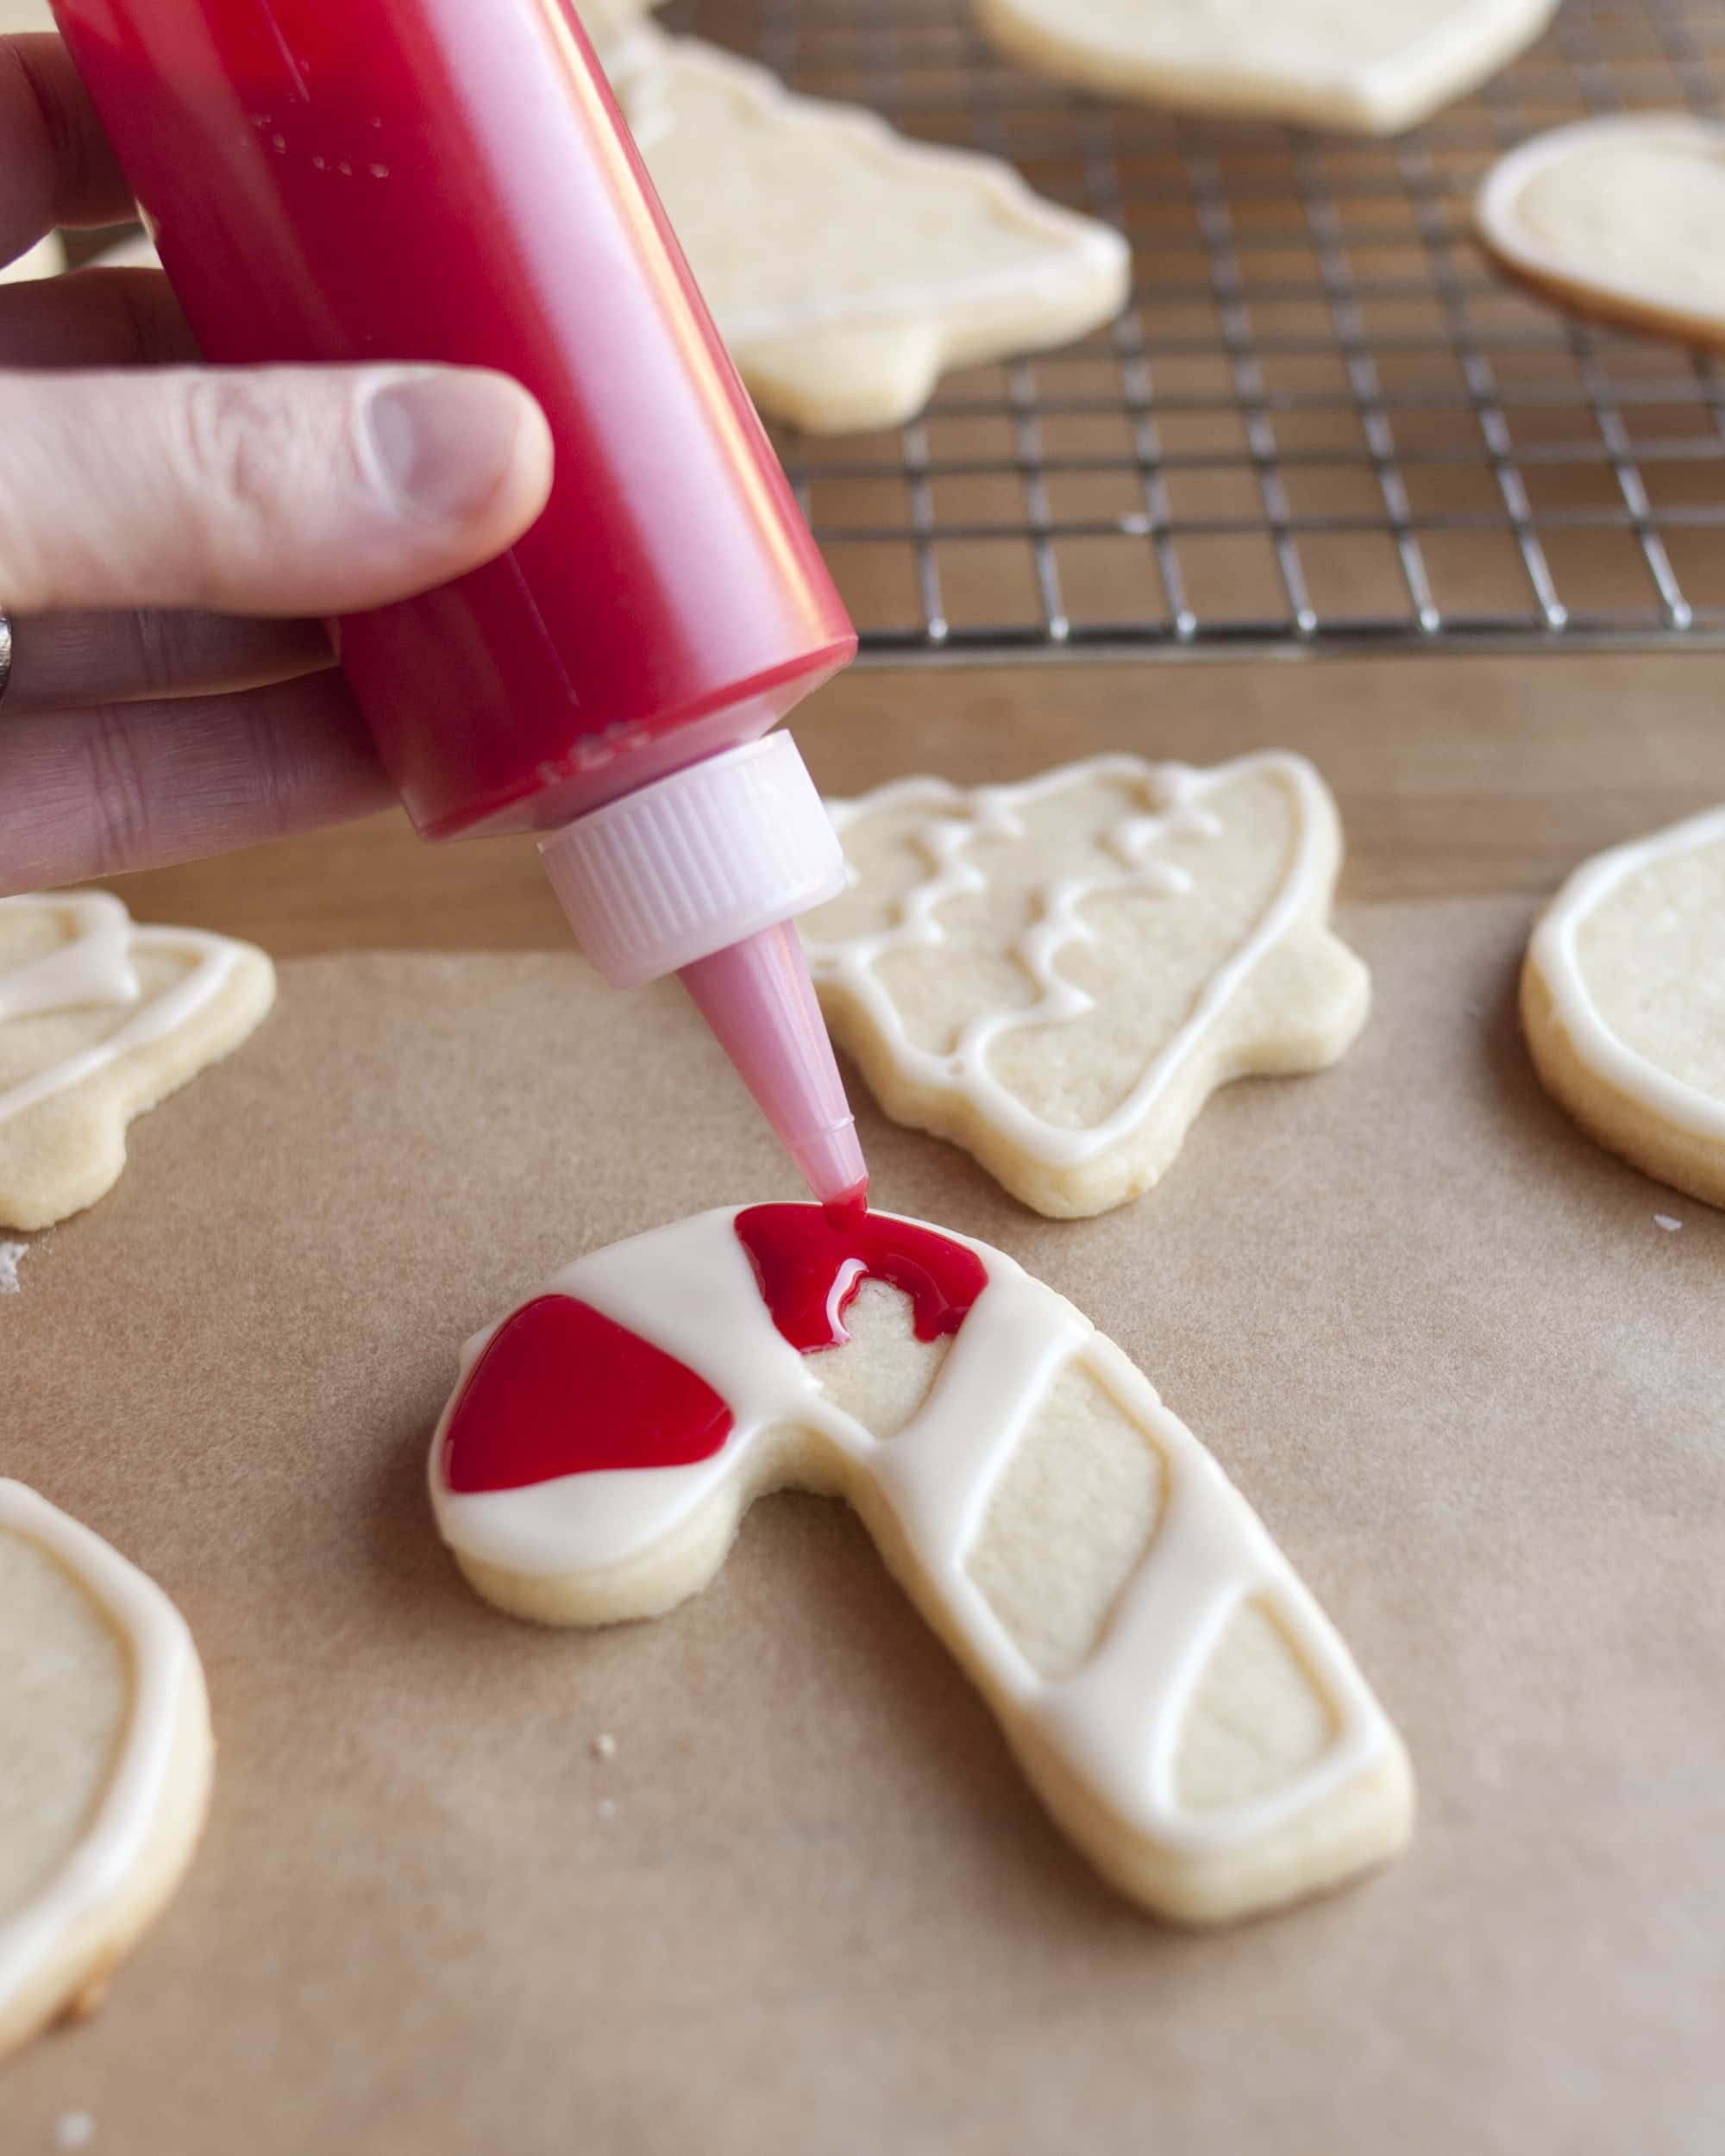 Cookie Decorating Icing Recipe
 How To Decorate Cookies with 2 Ingre nt Easy Icing